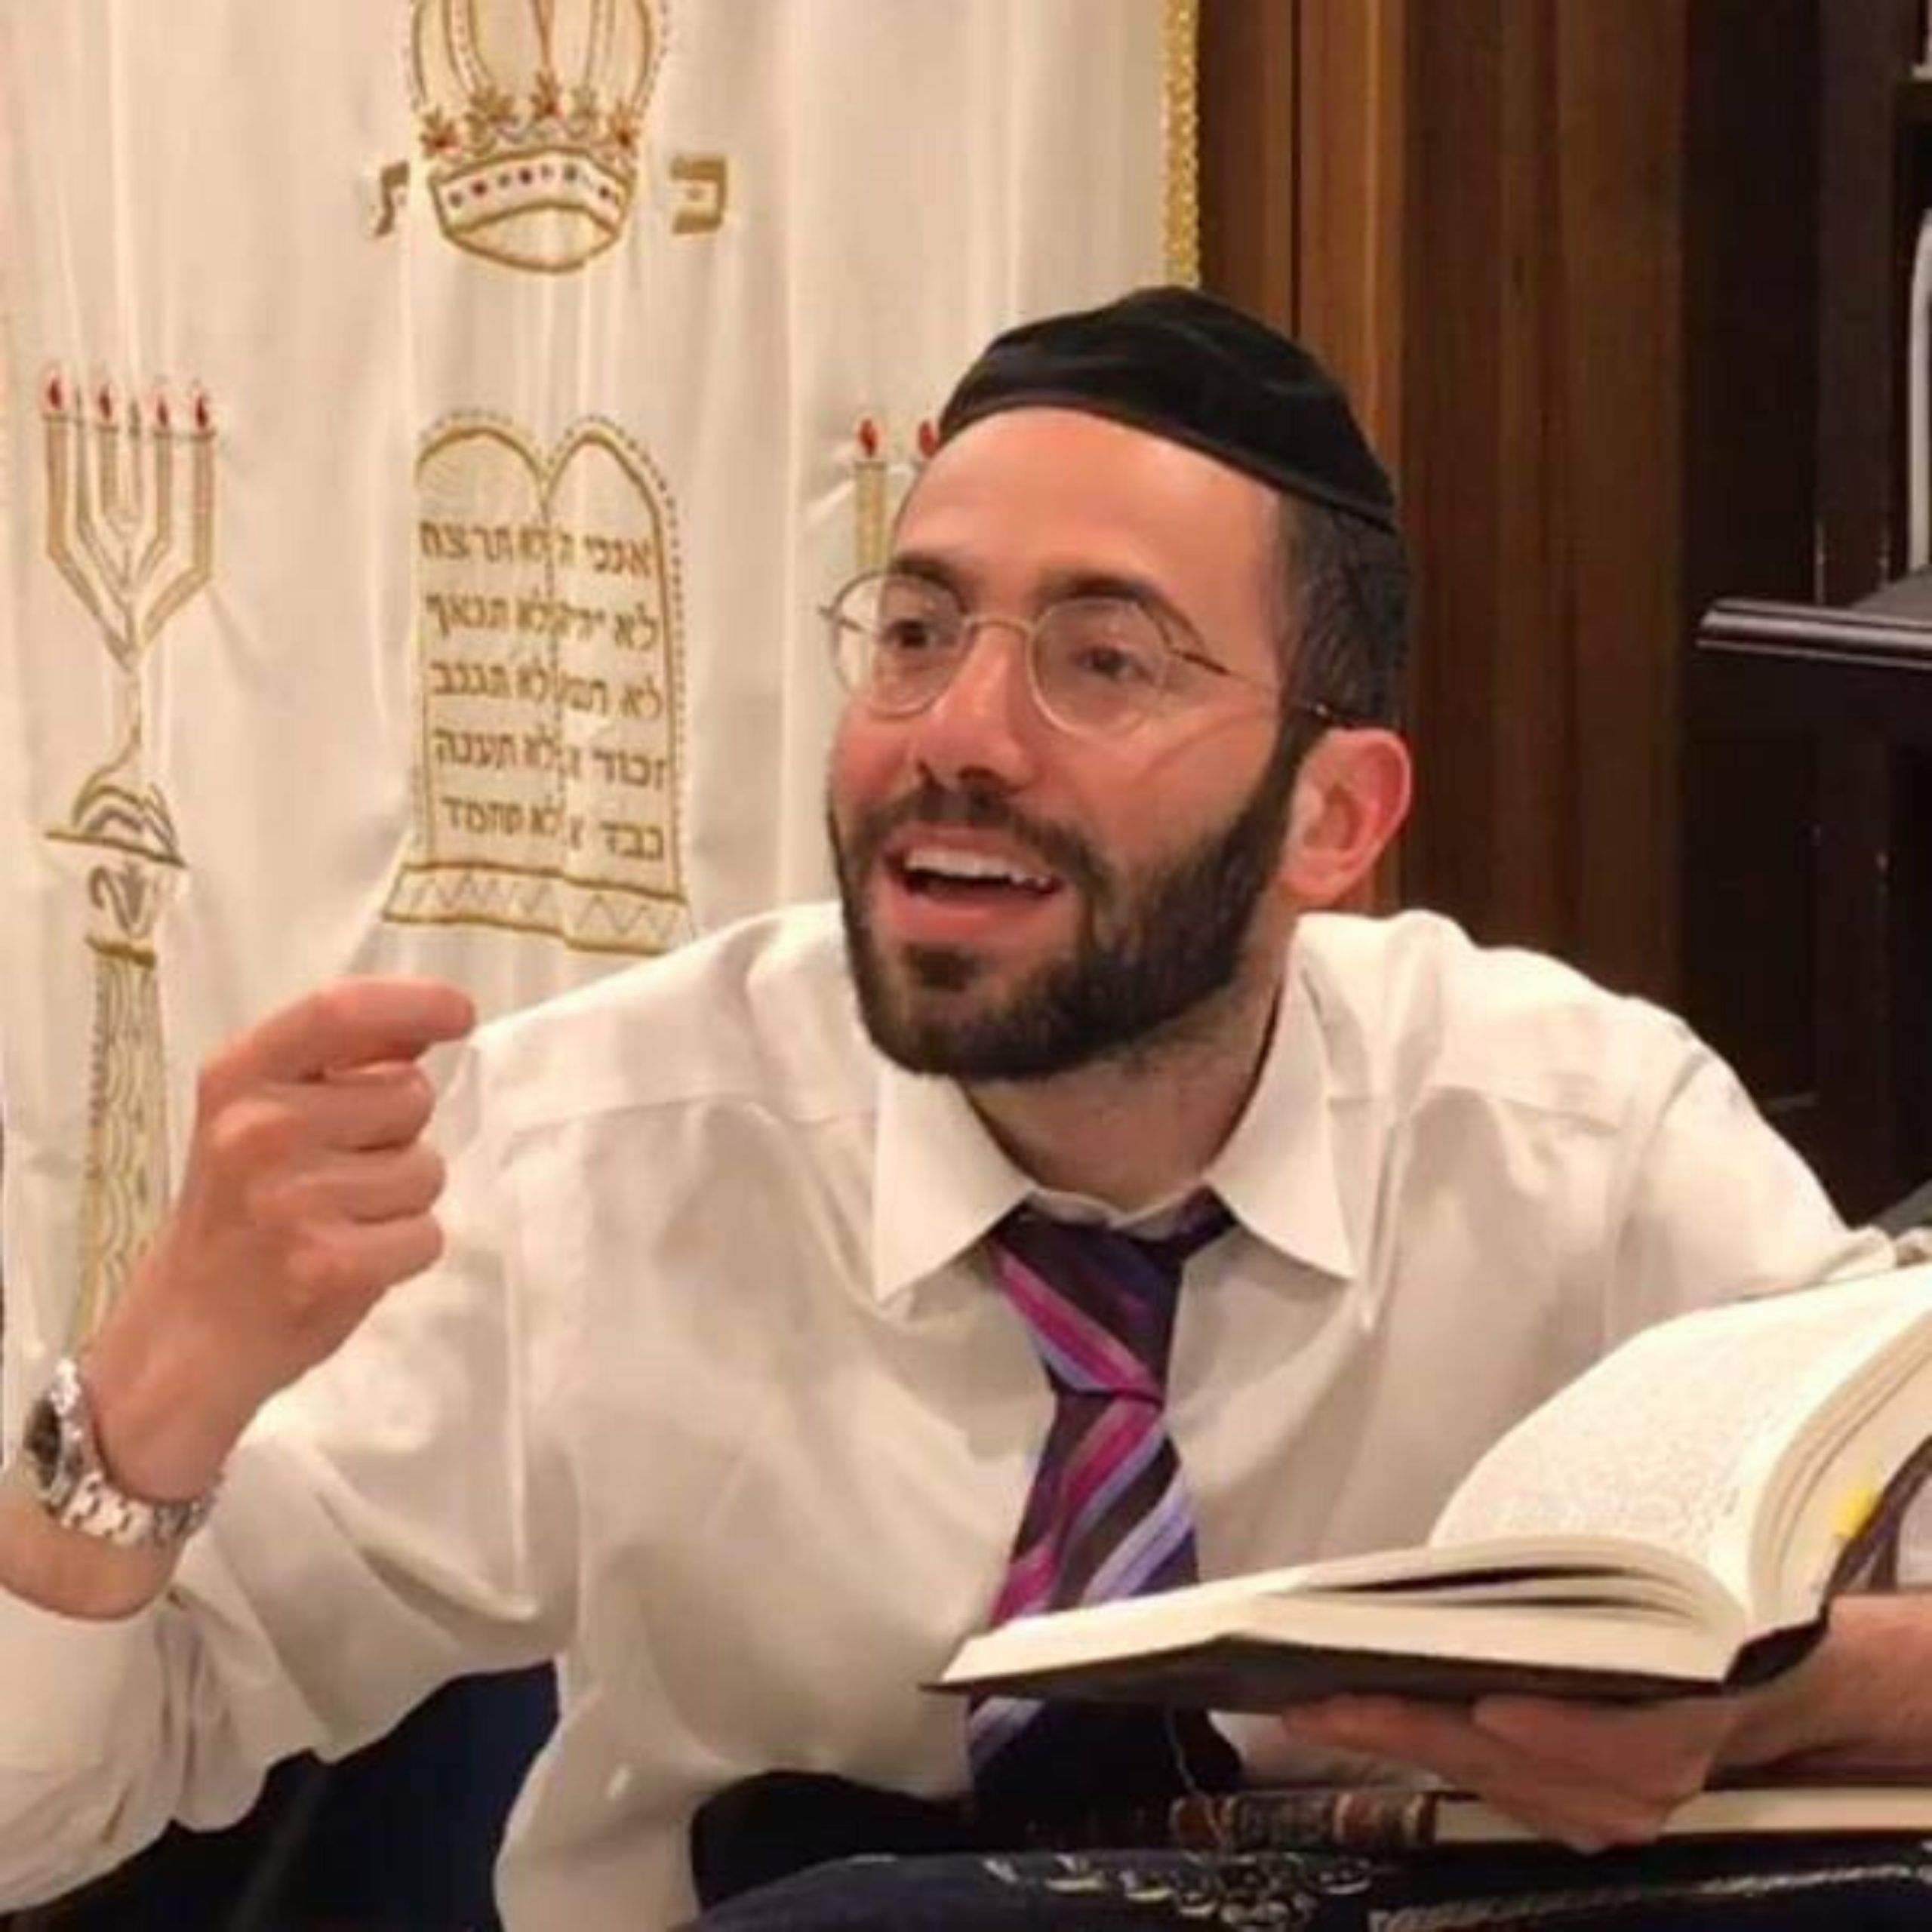 Story of Lubavitch And The Lesson To Look Ahead